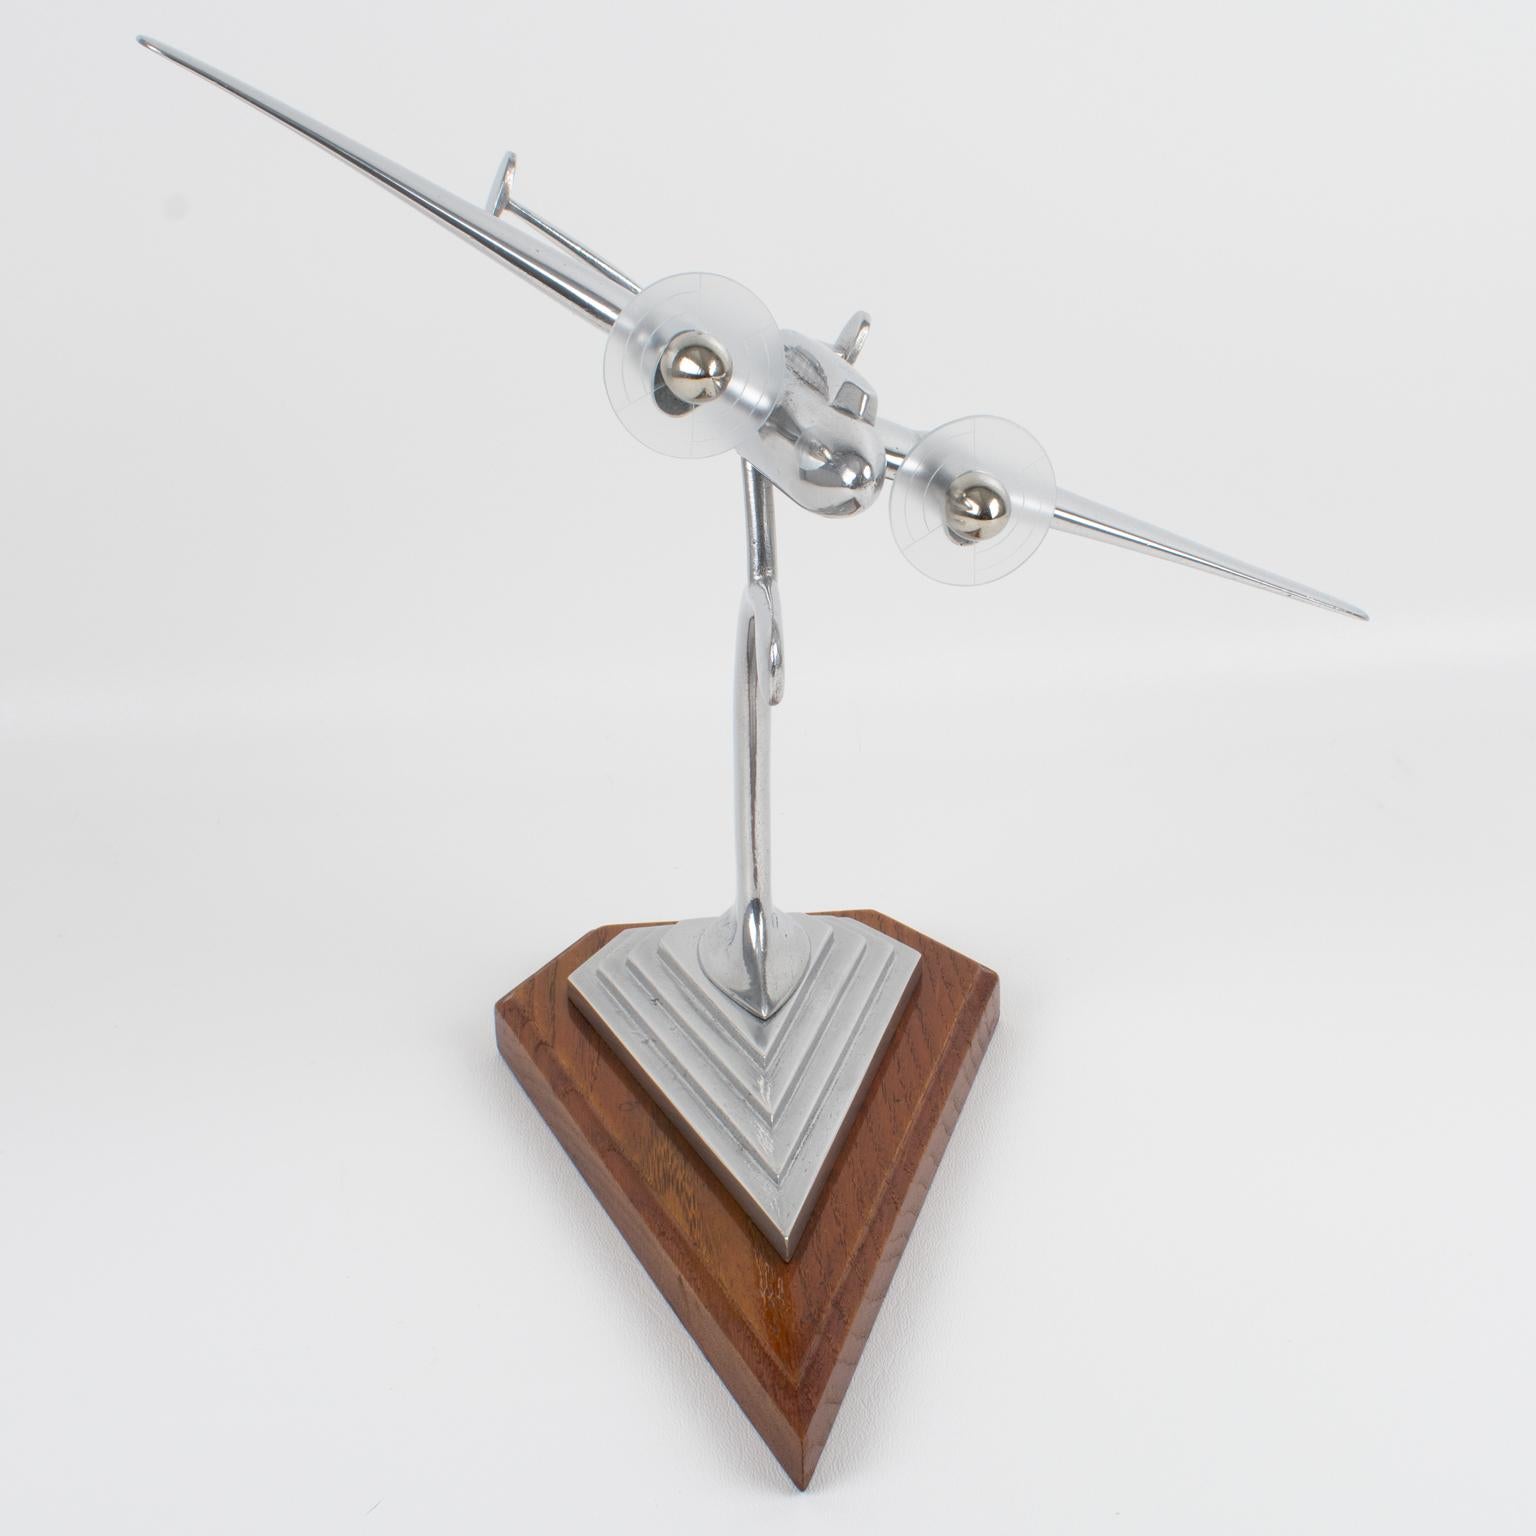 Elegant French airplane model mounted on a wood plinth. This nice sculptural model airplane is made with cast aluminum and has two Lucite propellers. Standing on a geometric raised stepped plinth in varnish wood with aluminum shaped arm. There is no